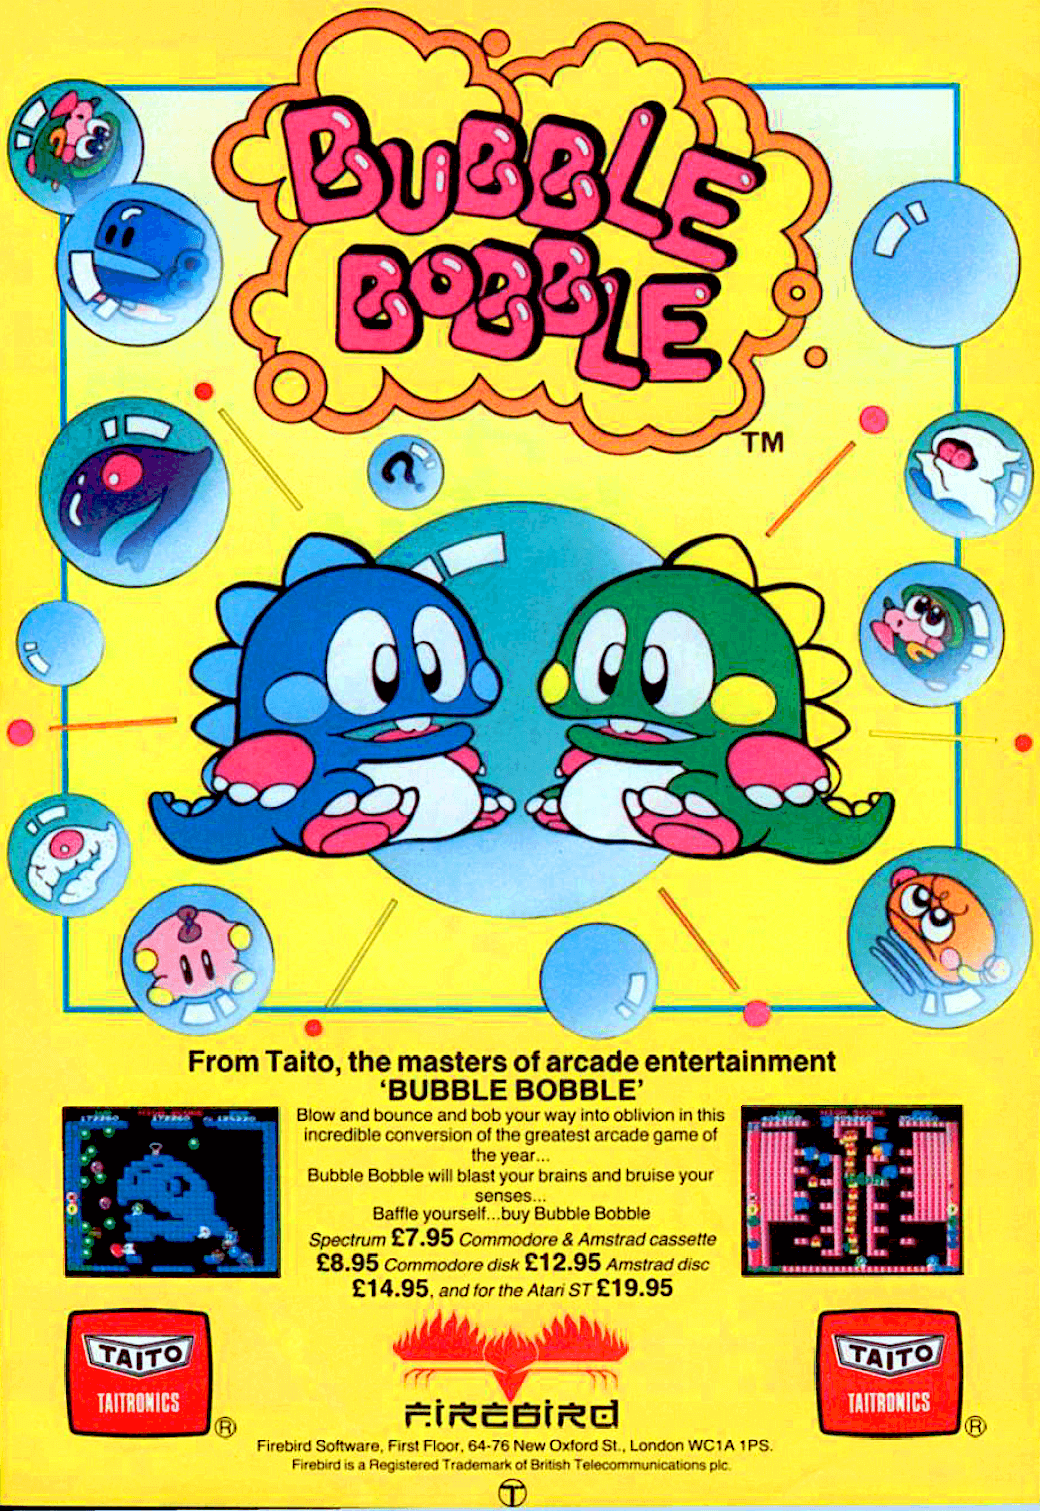 Image For Post | Of the original 8- and 16-bit ports, the MSX2, NES/Famicom Disk System, Game Boy and Master System ones were made by Taito itself (though the Master System version was published by Sega instead of Taito). The Game Gear port (which emulates the Master System version of Bubble Bobble) was done by South Korean developer Open Corporation. The Commodore 64, Spectrum and Amiga versions were developed by Software Creations and published in the UK by Firebird Software. Most of the other computer ports were made by US-based Novalogic with the exception of the X68000 game in Japan that was done by Dempa Shinbunsha. The Game Boy Color version was co-created by the video game developers Dreams and I.T.L.

Commodore 64 coder Steve Ruddy recalled in Retro Gamer:

    It wasn't daunting originally, as it looked like a fairly straightforward platform and sprite game. However, once you start playing you noticed how the bubbles followed air flow patterns and how they all gathered in fixed places - lots of sprites on the same line meant a sprite multiplexer wasn't suitable. Fortunately, having worked on the BBC Micro and Mystery of the Nile, I wasn't averse to using software sprites. ... We didn't understand all of the secrets so we just implemented the game to mimic what we did notice. So how the pick-ups appear isn't the same as the arcade on the C64, but it should be very similar to how the pickups appear after the machine is powered up.

The Master System/Game Gear version is noted for having two hundred levels (in effect the normal and super modes consecutively) and is considered one of the best conversions available. This version was originally released as Final Bubble Bobble in 1988 for the Master System in Japan. When it arrived in Europe three years later, the title was shortened to Bubble Bobble. The game was never released for the Master System in North America (the Game Gear being instead the platform in that region for this particular version of Bubble Bobble).

The X68000 version of Bubble Bobble includes a secret "Sybubblun" mode, which contains 20 very difficult levels with the characters changed to those from Syvalion, another game designed by Fukio Mitsuji.

In 1996, Taito announced that they lost the original source code. As Probe Entertainment was in charge of the home conversions, Taito sent them a Bubble Bobble arcade PCB so they could play the original game and reproduce its mechanics. This led to the release of Bubble Bobble also featuring Rainbow Islands for Saturn, PlayStation and PC in 1996, published by Acclaim Entertainment.

In the Game Boy and Game Boy Color versions, since the Game Boy is in its nature a single player device, the storyline involves Bub looking for "Moon Water" to cure his brother. They are known as Bubble Bobble and Classic Bubble Bobble respectively.

In October 2005, a version was released for the Xbox, PlayStation 2, and PC as part of the Taito Legends compilation of classic arcade games.

At the end of 2006, a new port for mobile phones in Europe and Japan was released.

On December 24, 2007, the NES version of Bubble Bobble was released in North America on Nintendo's Virtual Console service for the Wii. It costs 500 Wii Points, the equivalent of US$5. The Famicom version of Bubble Bobble was also released for the Nintendo eShop on October 16, 2013 for the Nintendo 3DS and on January 29, 2014 for the Wii U

On November 11, 2016, the game (alongside 29 other games) was included in the NES Classic Edition (known as the Nintendo Classic Mini in Europe).

Clones
The arcade version of Bubble Bobble was widely bootlegged in its day, but due to a security chip installed by Taito (known as the PS4, based on a Motorola 6800) none of the bootlegs played exactly like the original. Through a technique called "decapping", the MAMEDEV team has been able to reverse engineer the workings of the chip and emulate it perfectly. Following that, project Bubble Bobble REDUX has been able to implement an exact version of Bubble Bobble on bootleg boards.

A version also exists for the BBC Micro in the public domain though never officially released. According to one of the creators it was coded by them independently in 1988 as a clone of the C64 version, but when they approached publishers it was deemed that it would not be financially viable to release a licensed product for the BBC Micro at that time.

Cancelled mobile port
Sometime in the early 2000s, Stephen Ruddy (author of the C64 conversion) attempted to port the game to mobile phones using Java. All 100 levels were copied across, including most of the movement patterns, but the game was never completed. This site has some video of what does exist. 

In 2002 a homebrew version for the Texas Instruments TI-8x series of calculators was released.

The Bubble Bobble: Lost Cave fan project added new levels that runs on the original arcade hardware.

Other media
The Bubble Bobble characters have made cameo appearances in the manga Gamest Nª49: Gasmest Island Mokushiroku on October 1992 created by Shinseisha. Bub, from Bubble Bobble and Chack, from Chack'n'Pop, appeared in the manga Cha Kurun Desu (ちゃくるんです)[34] on May 2009. Bubble Bobble was featured in Episode 4, Season 3 of Black Mirror, "San Junipero" as a video game played by Yorkie in 1987 at the Tucker club. Bubblun from Bubble Bobble makes cameo in the manga High Score Girl by Rensuke Oshikiri, Published by Gangan Comics, on 2010. 

Endings
If you finished level 99 by killing the enemies you got the bad ending. You had to get the secret key which opened up another 120 or so levels. 
  
Alternate Titles

    "泡泡龍" -- Chinese spelling (traditional)
    "Final Bubble Bobble" -- Japanese SEGA Master System title
    "Dragon Maze" -- Brazilian SEGA Master System title

    "Arcade Archives: Bubble Bobble" -- PS4 title
    "バブルボブル" -- Japanese spelling